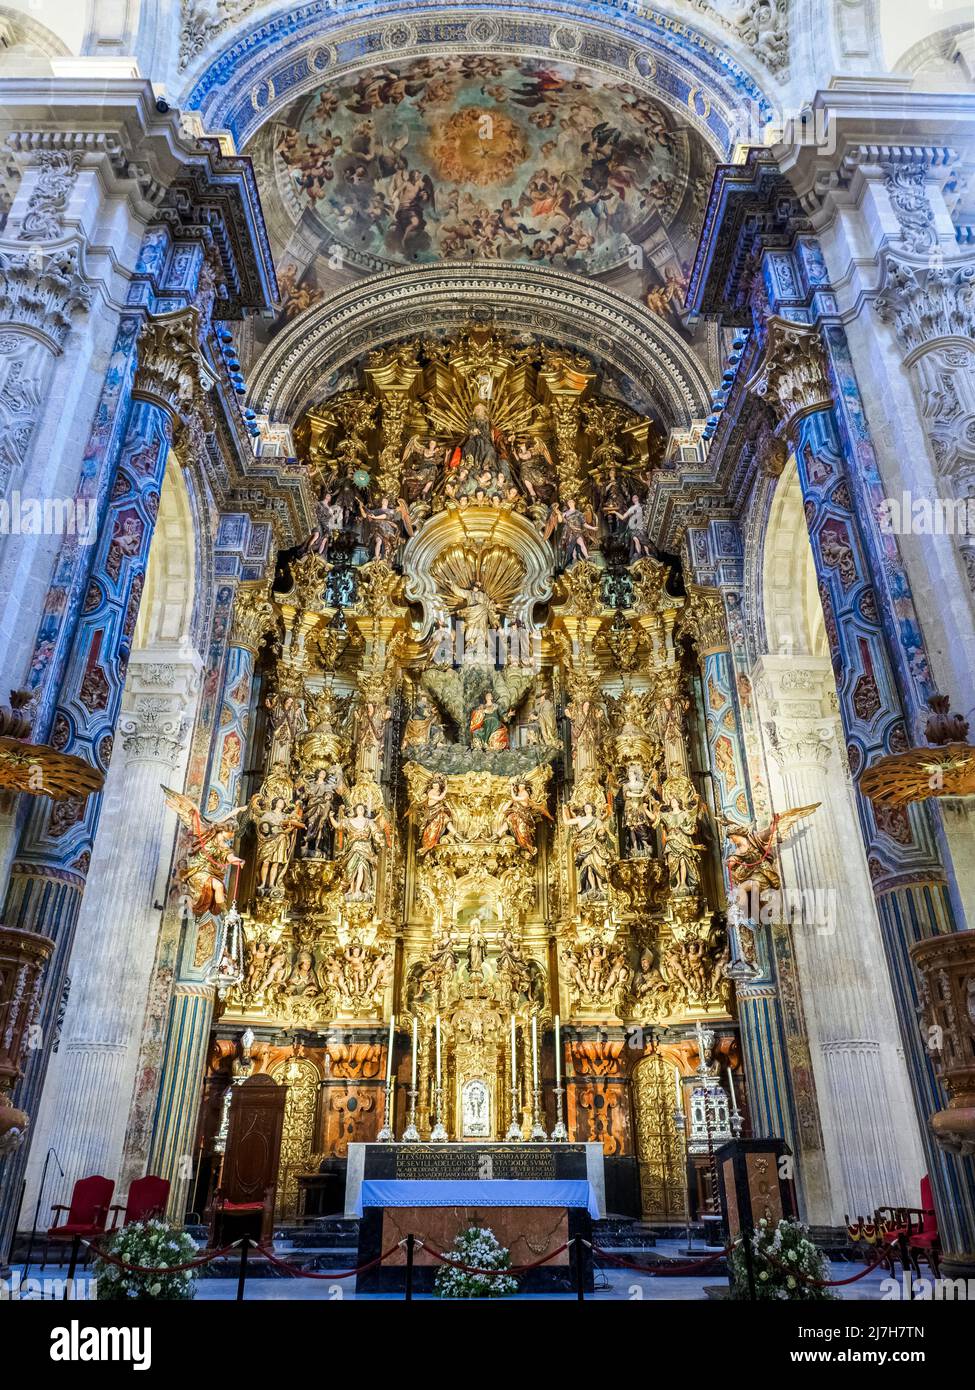 The transfiguration of Christ in the main altarpiece of the Collegiate Church of the Divine Savior - Seville, Spain Stock Photo